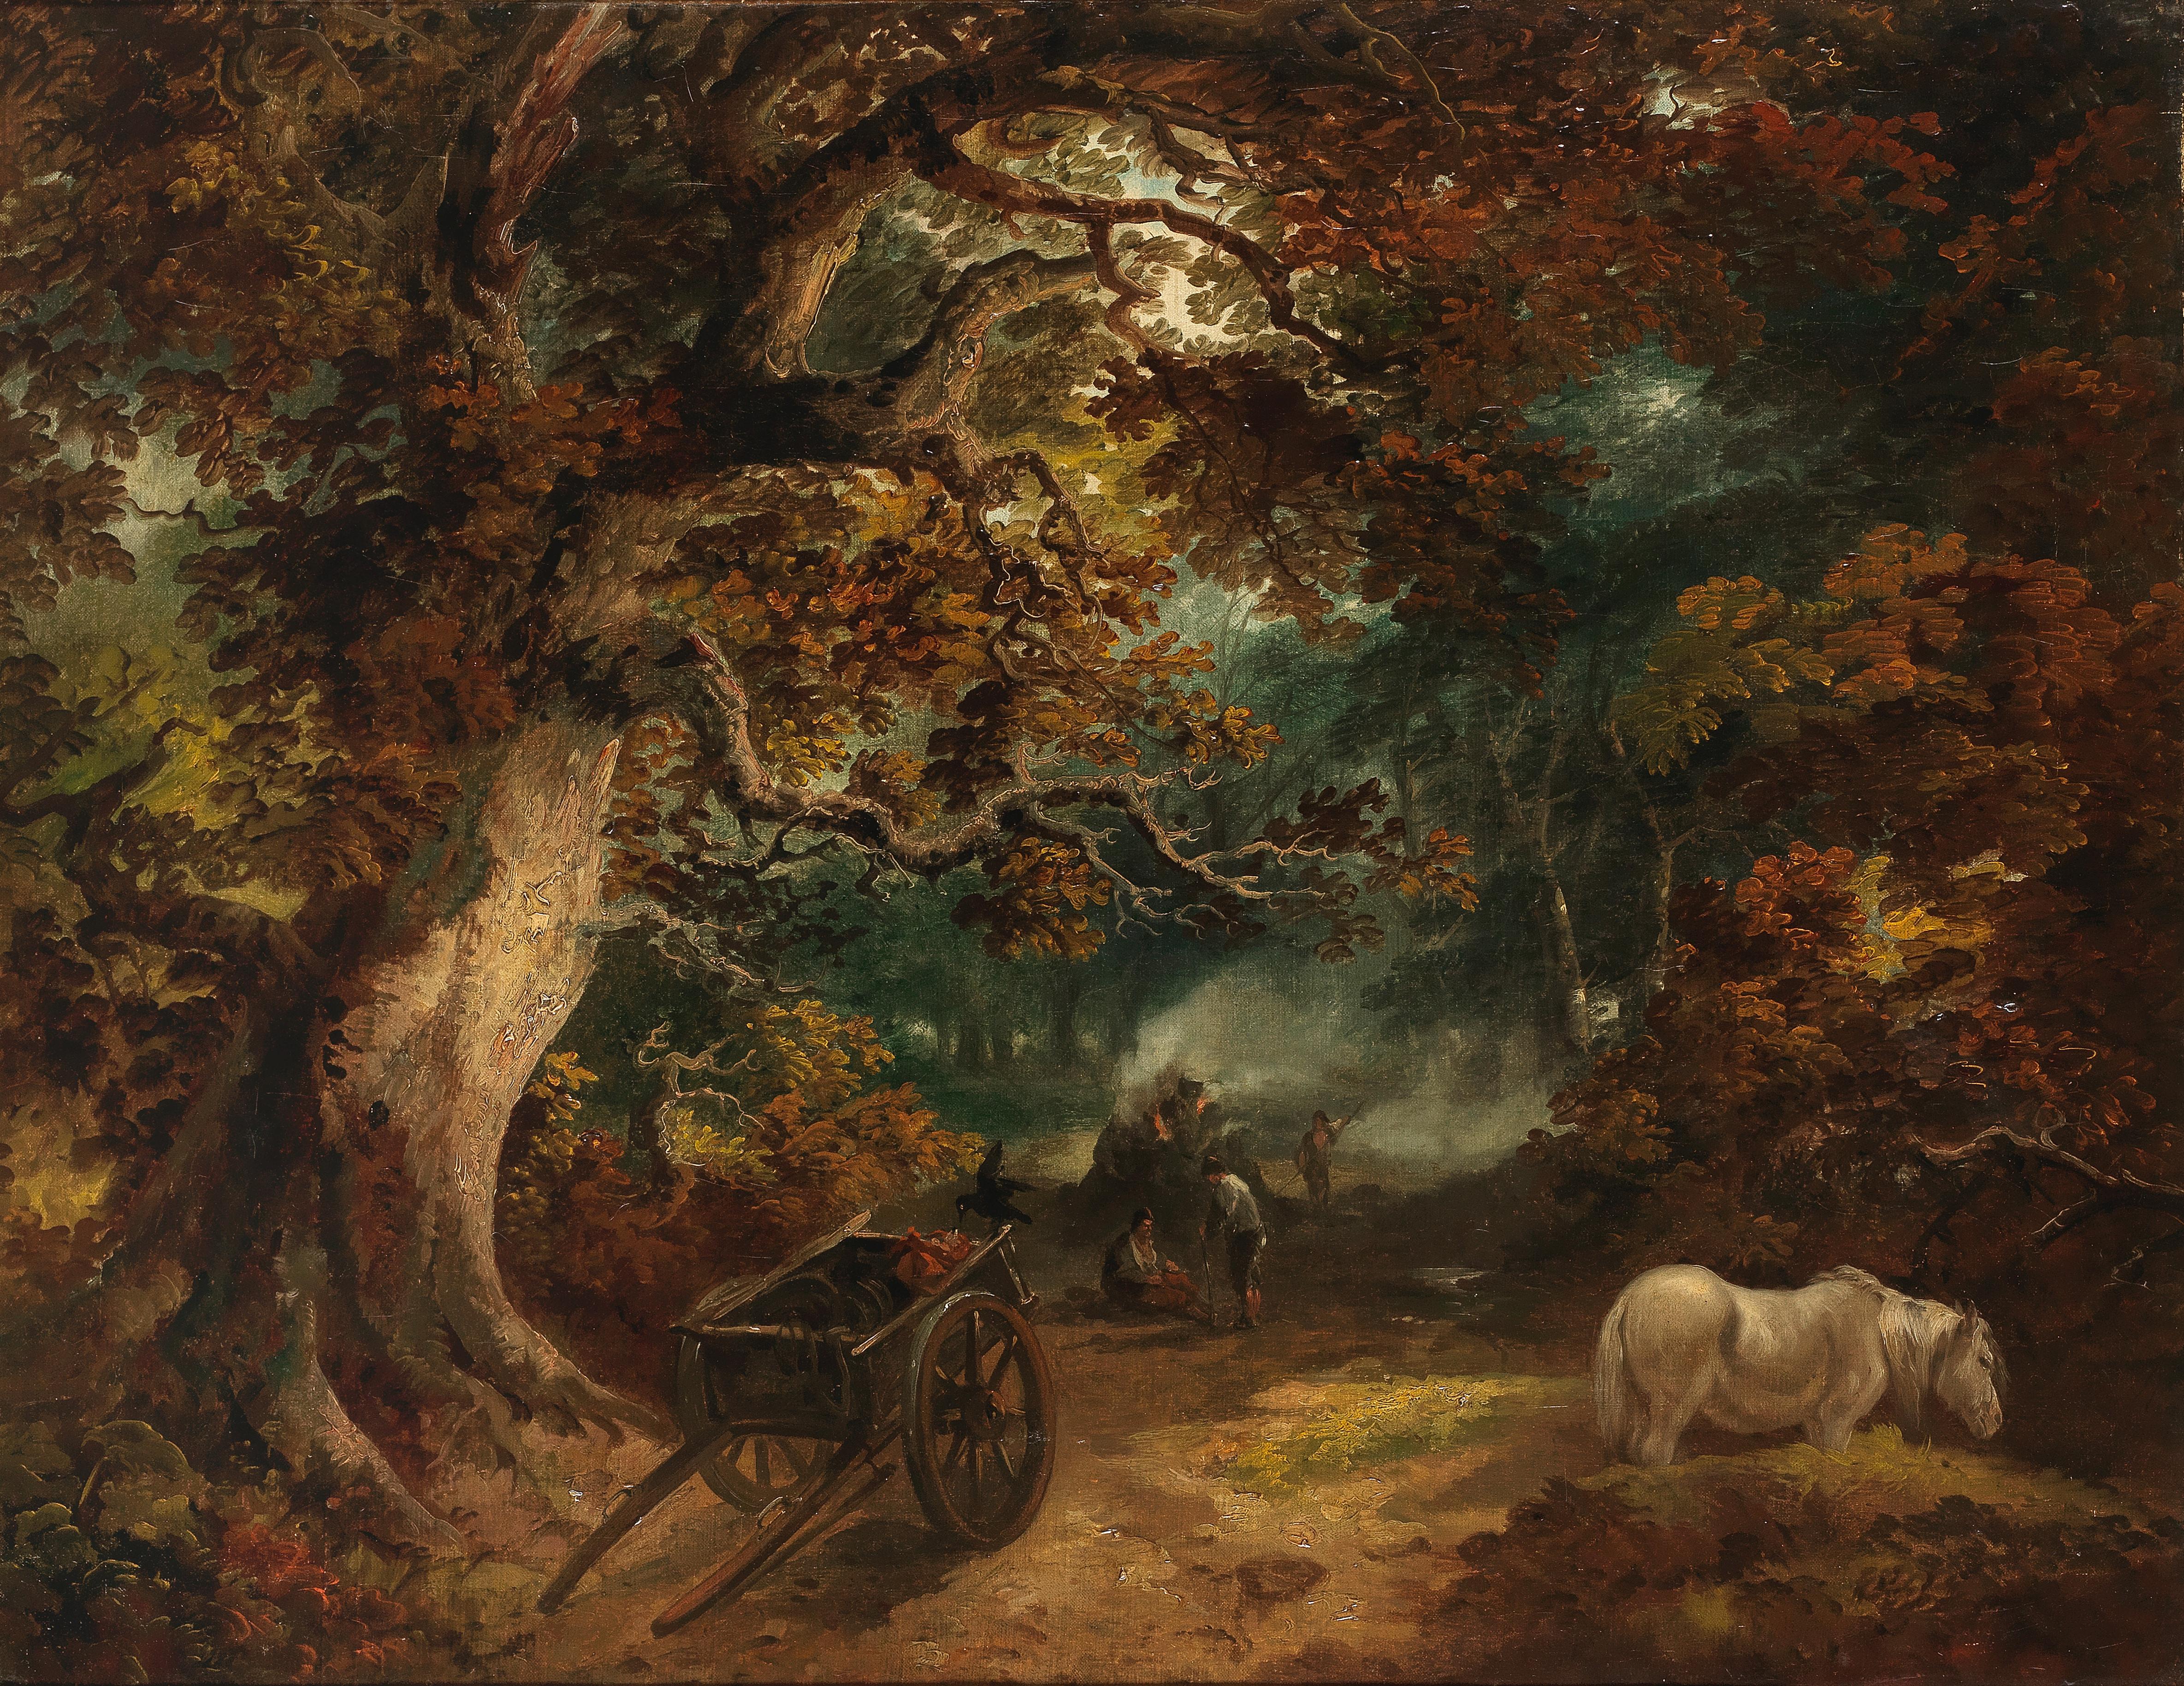 Figures resting by a fire with a wagon in a wooded landscape - Painting by Benjamin Barker of Bath